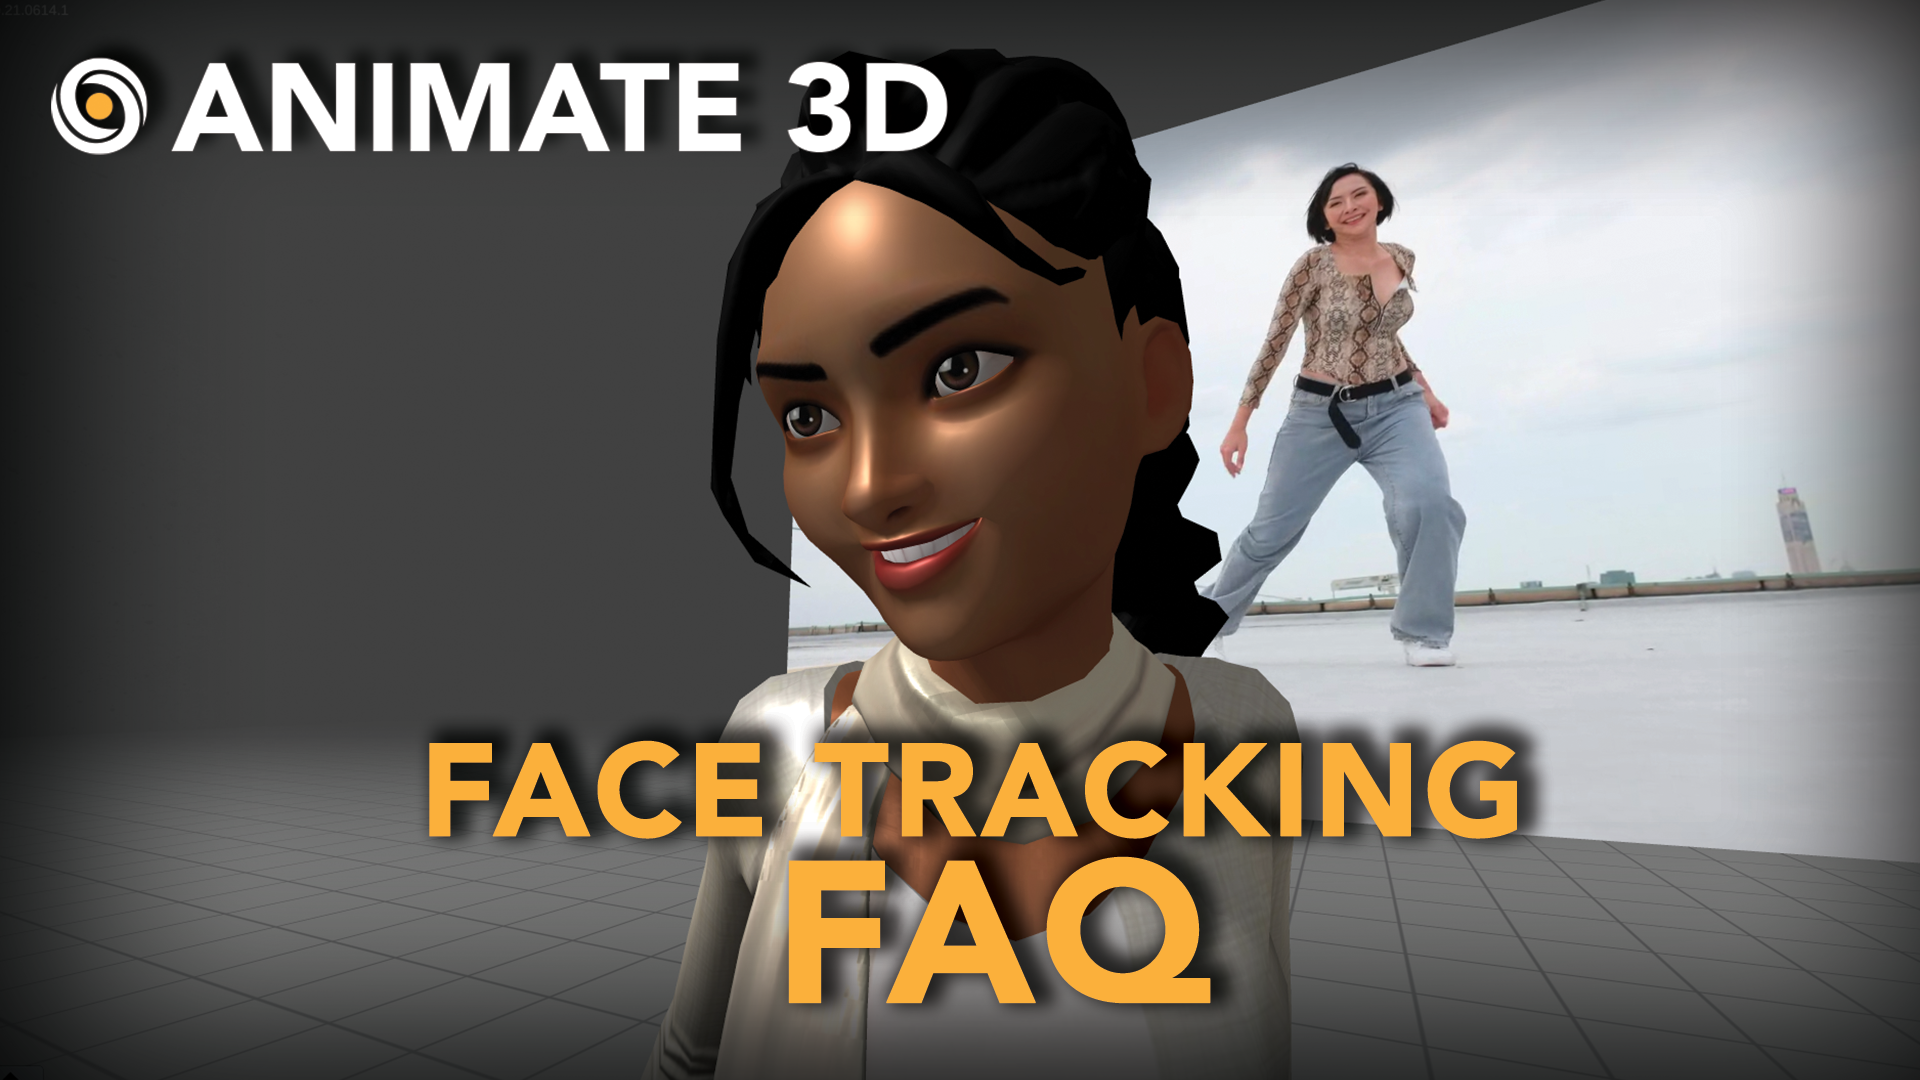 Animate 3D: Face Tracking FAQ